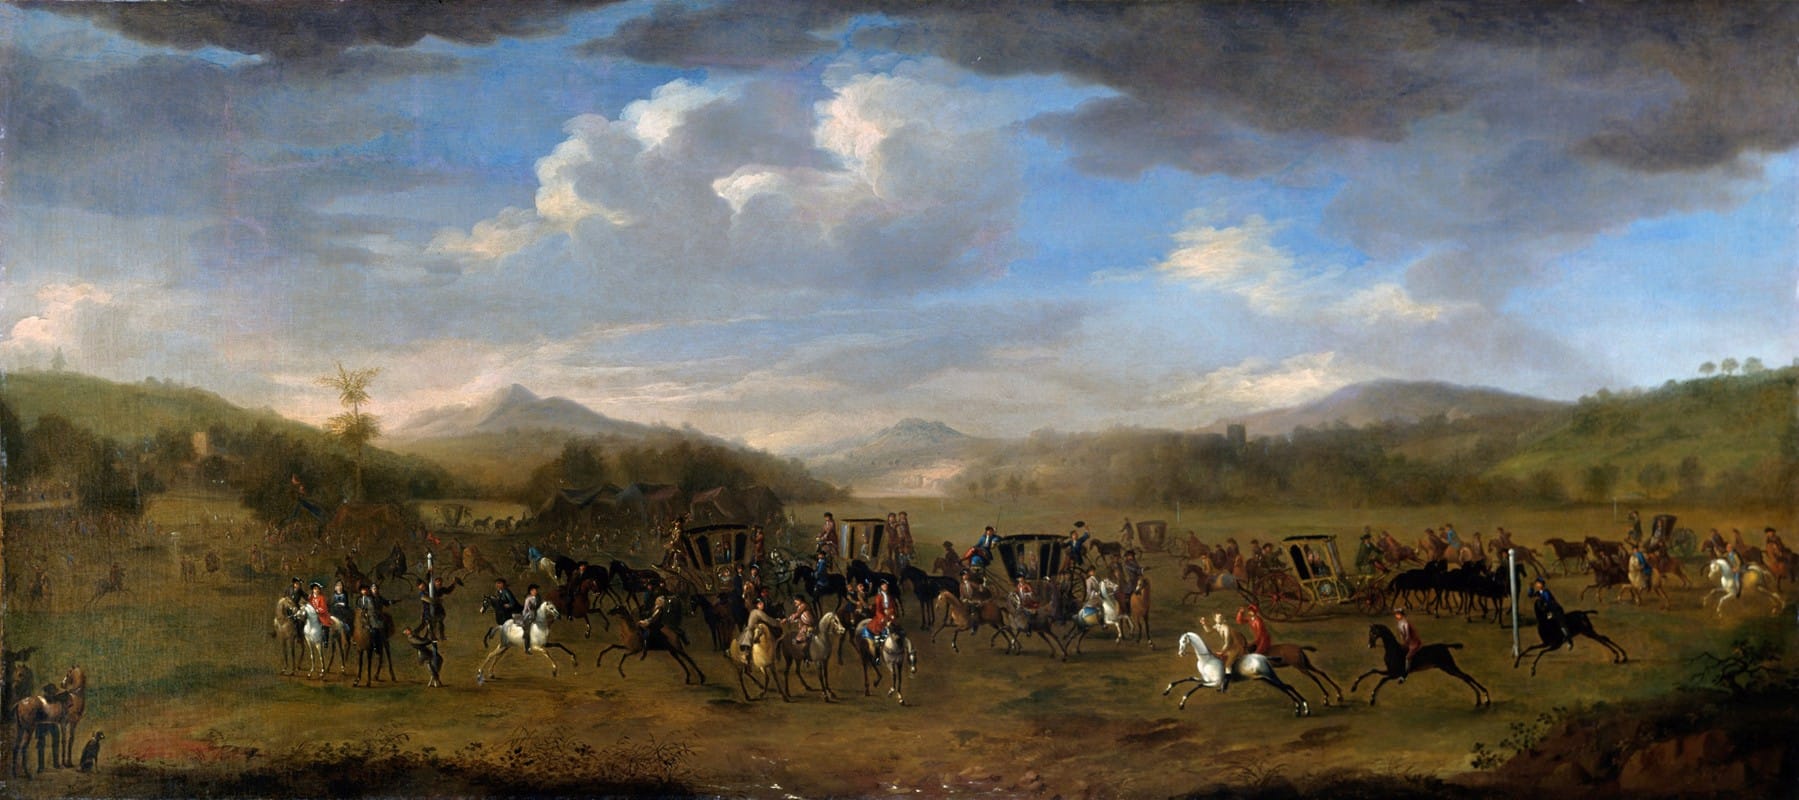 James Ross - The Finish of a Horse Race with a Country Fair in the Background